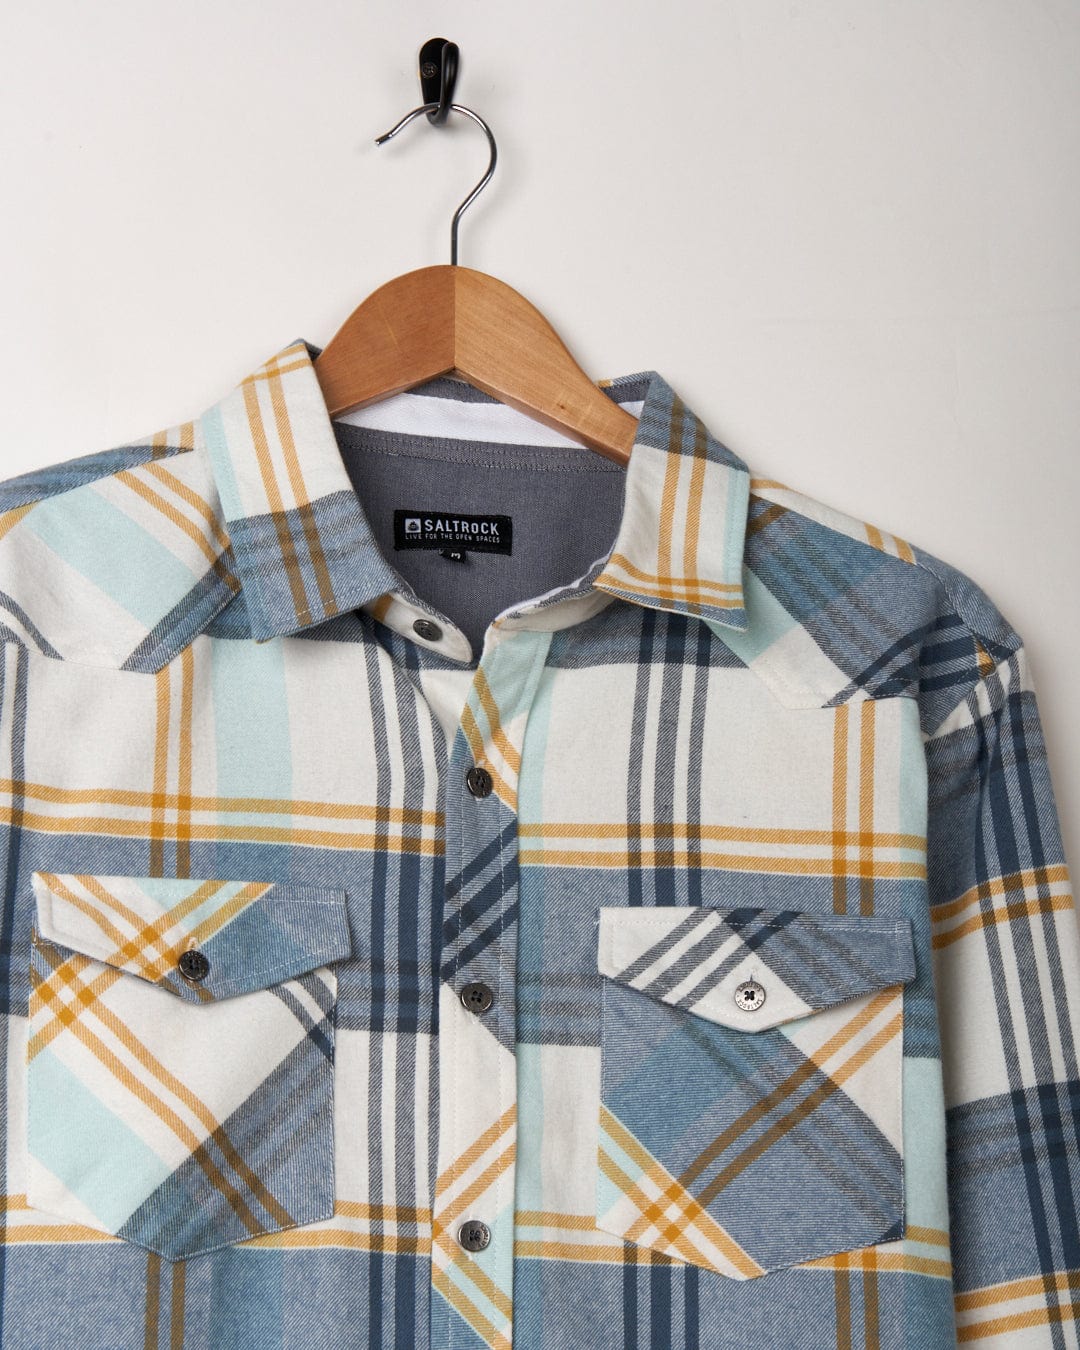 Saltrock Miles - Mens Long Sleeve Shirt - Blue on a hanger against a white background.